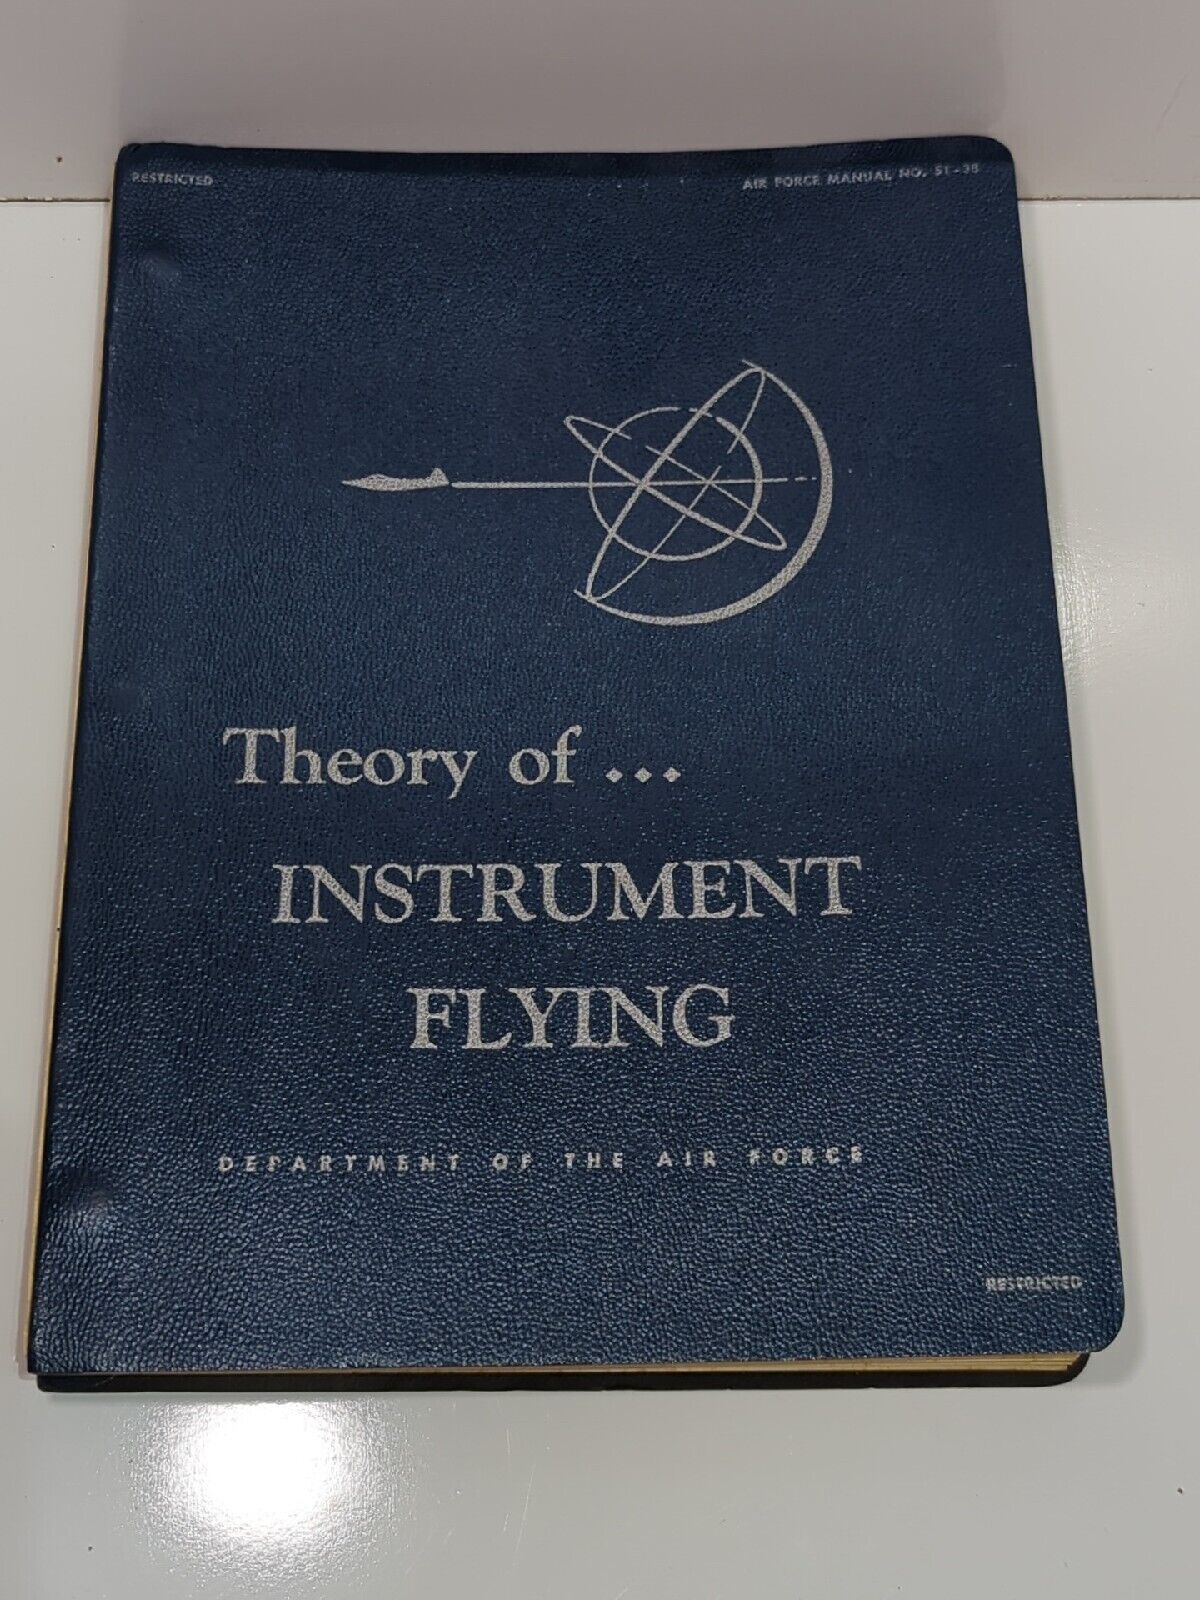 USAF 1950 Theory of Instrument Flying 51-38